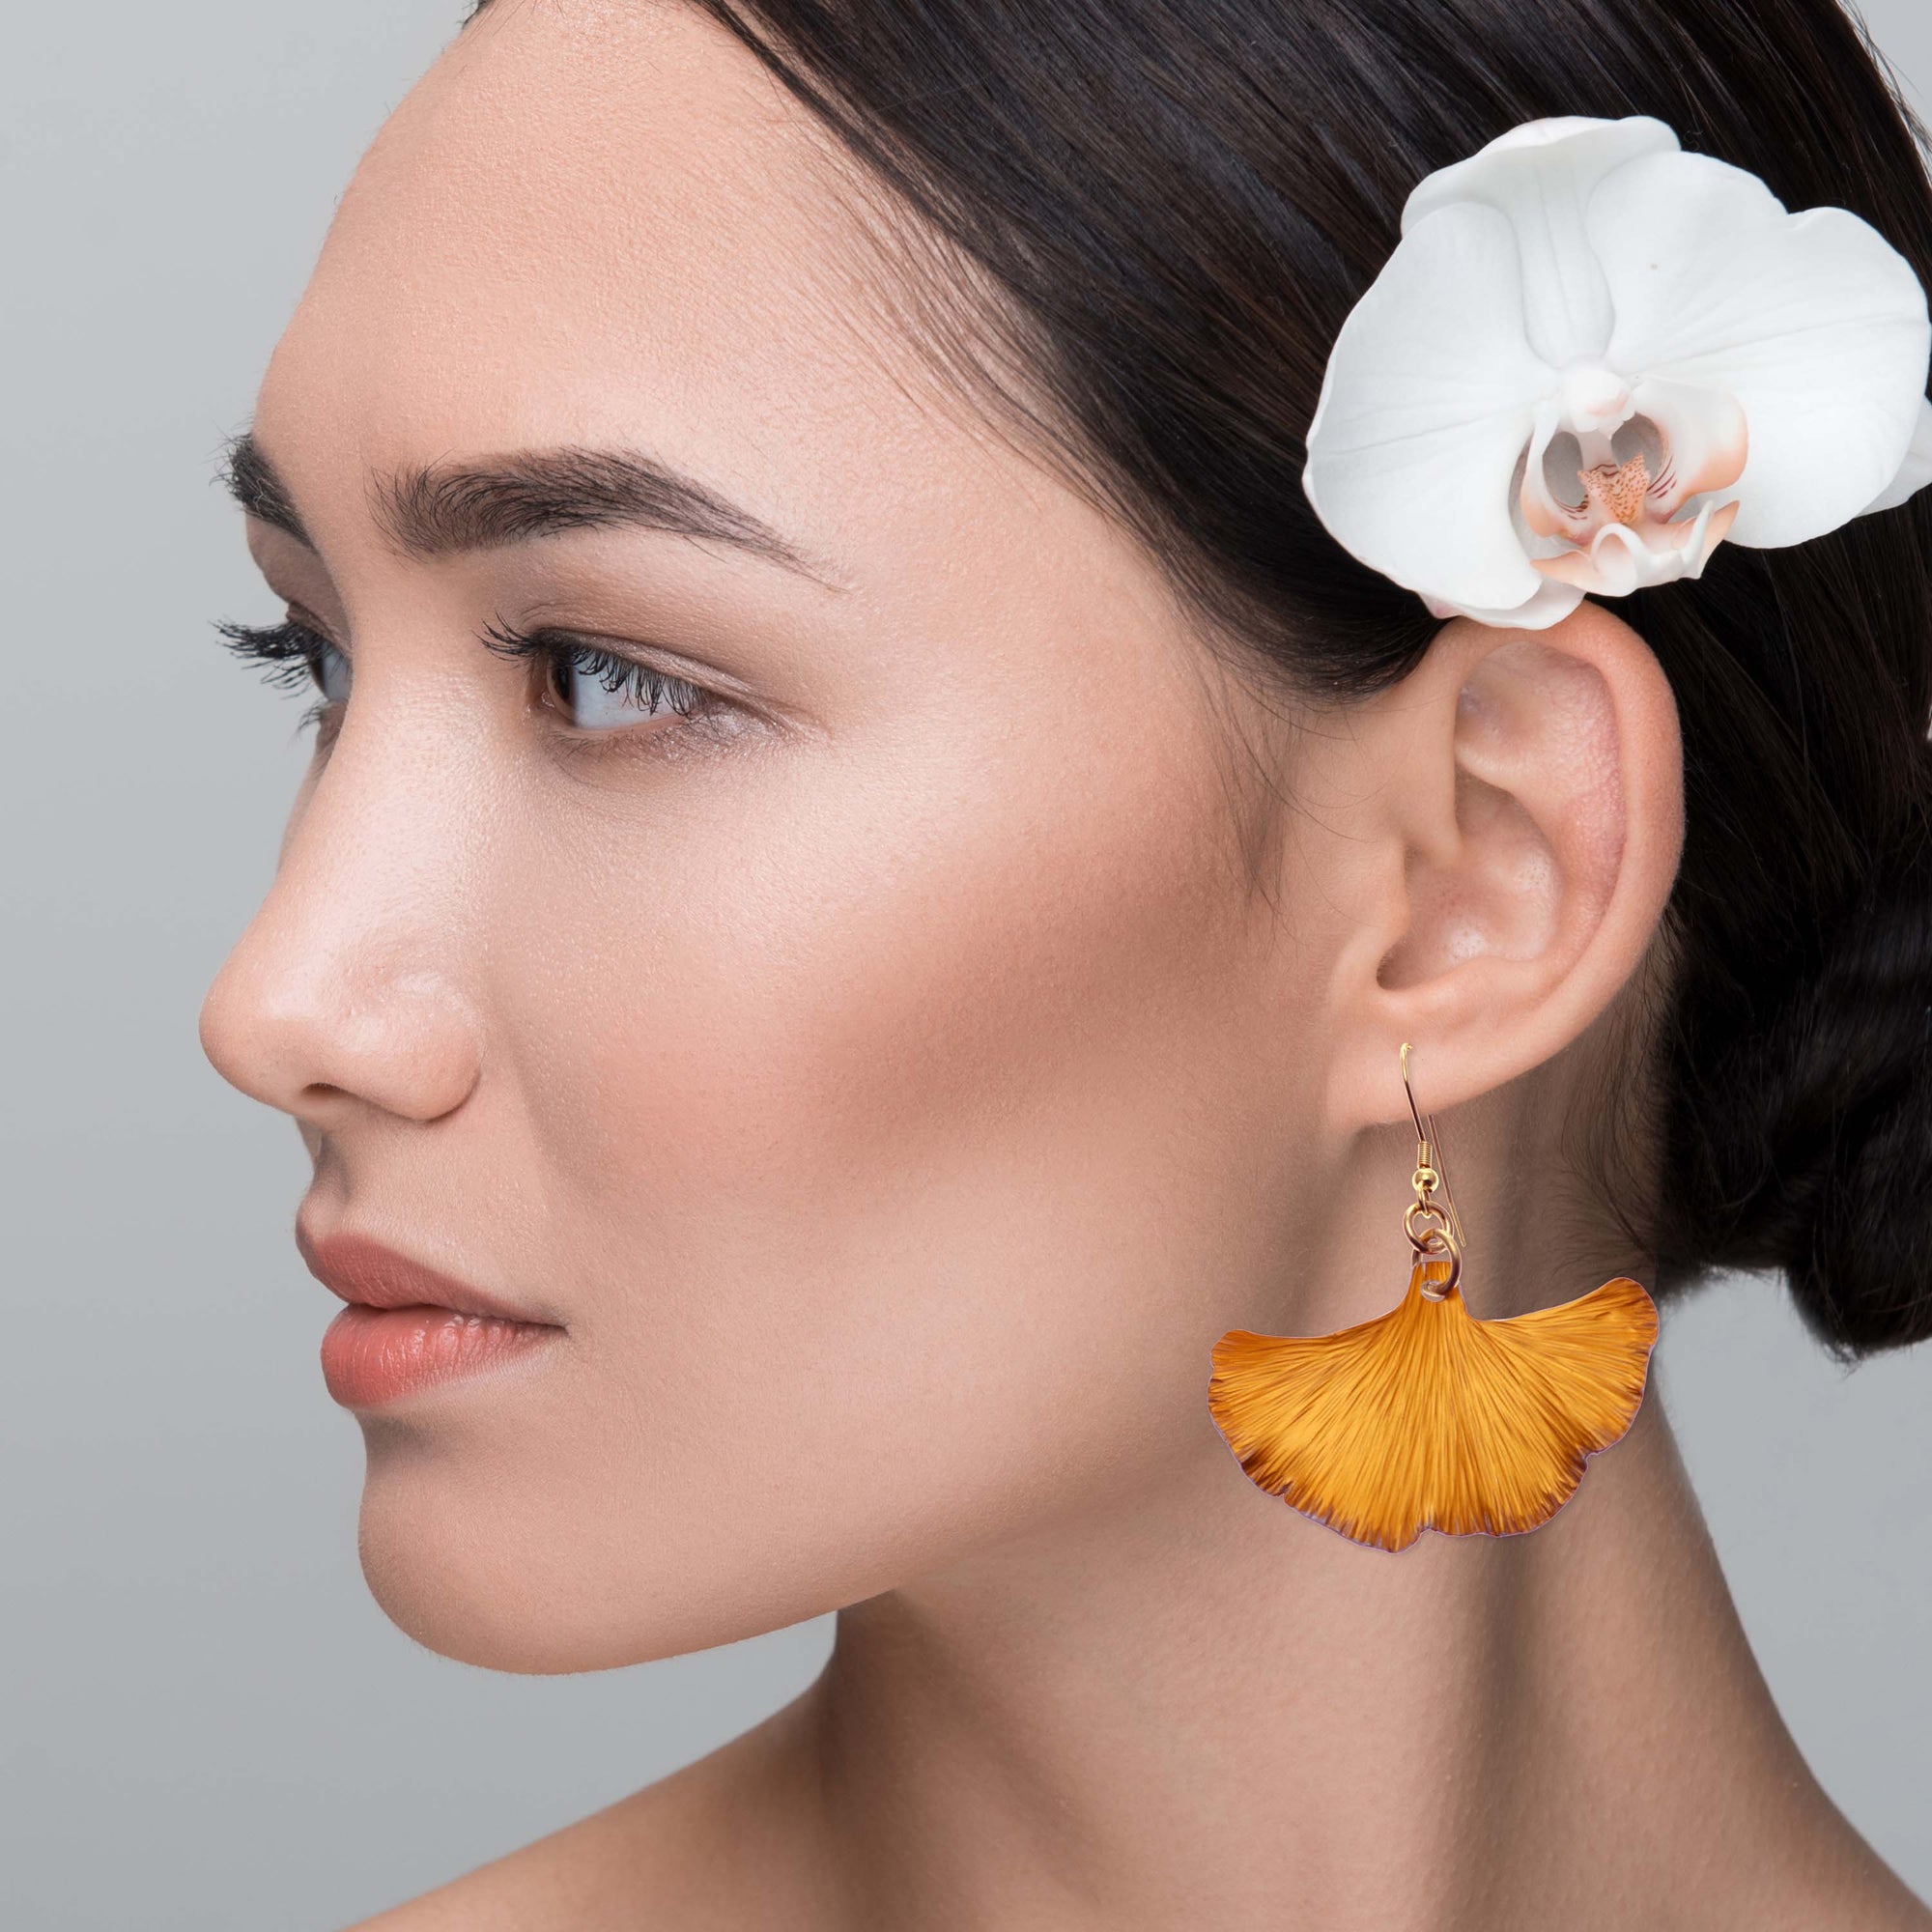 A woman with a flower in her hair and wearing an orange ginkgo leaf earring, radiating elegance and grace.